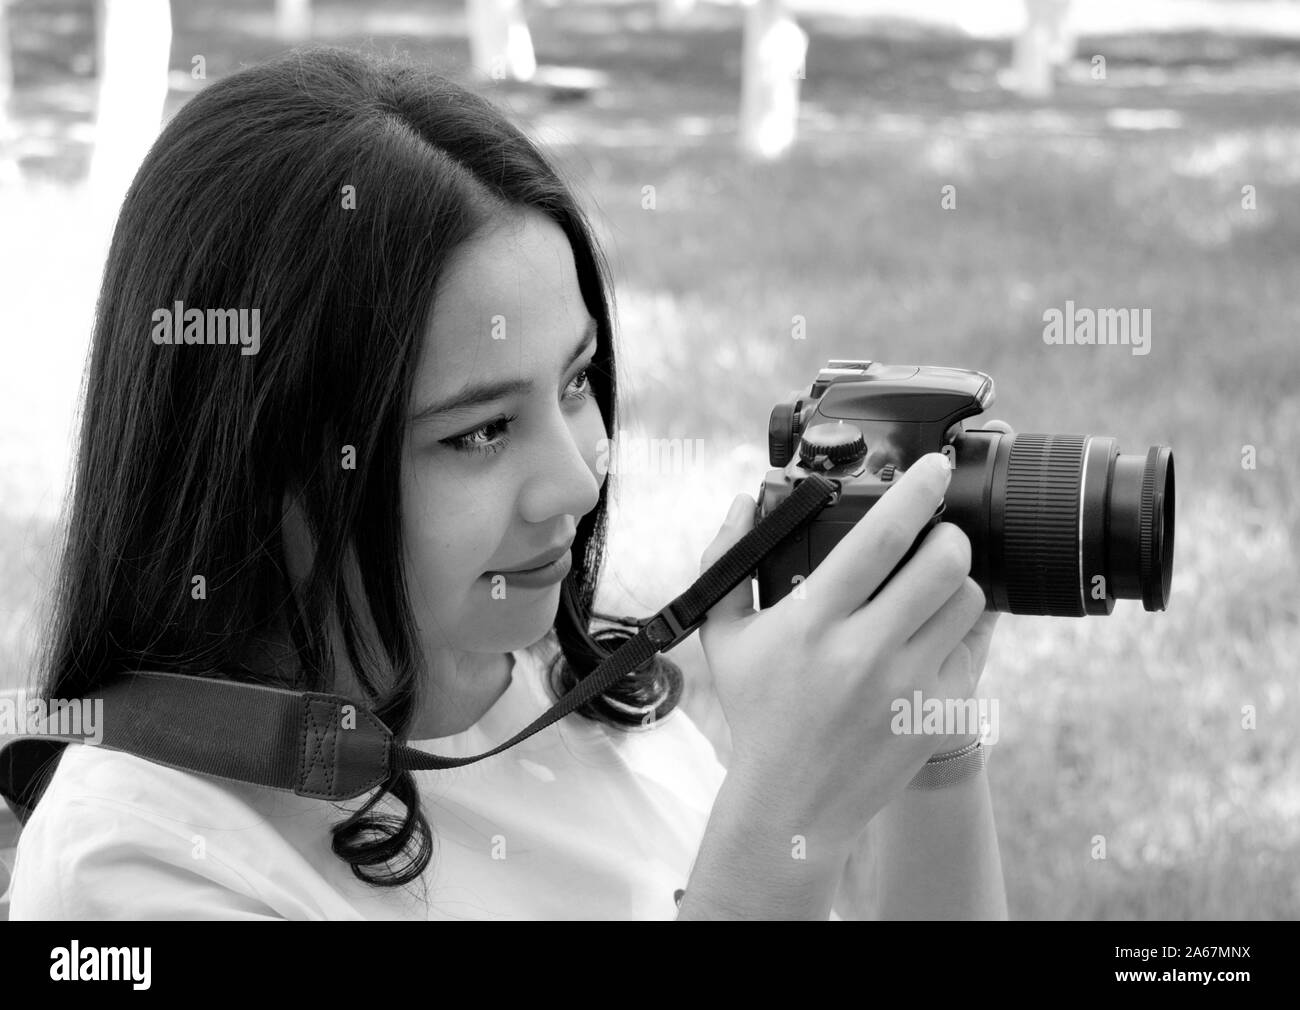 photo with the image of a beautiful young girl with a photo camera Stock Photo